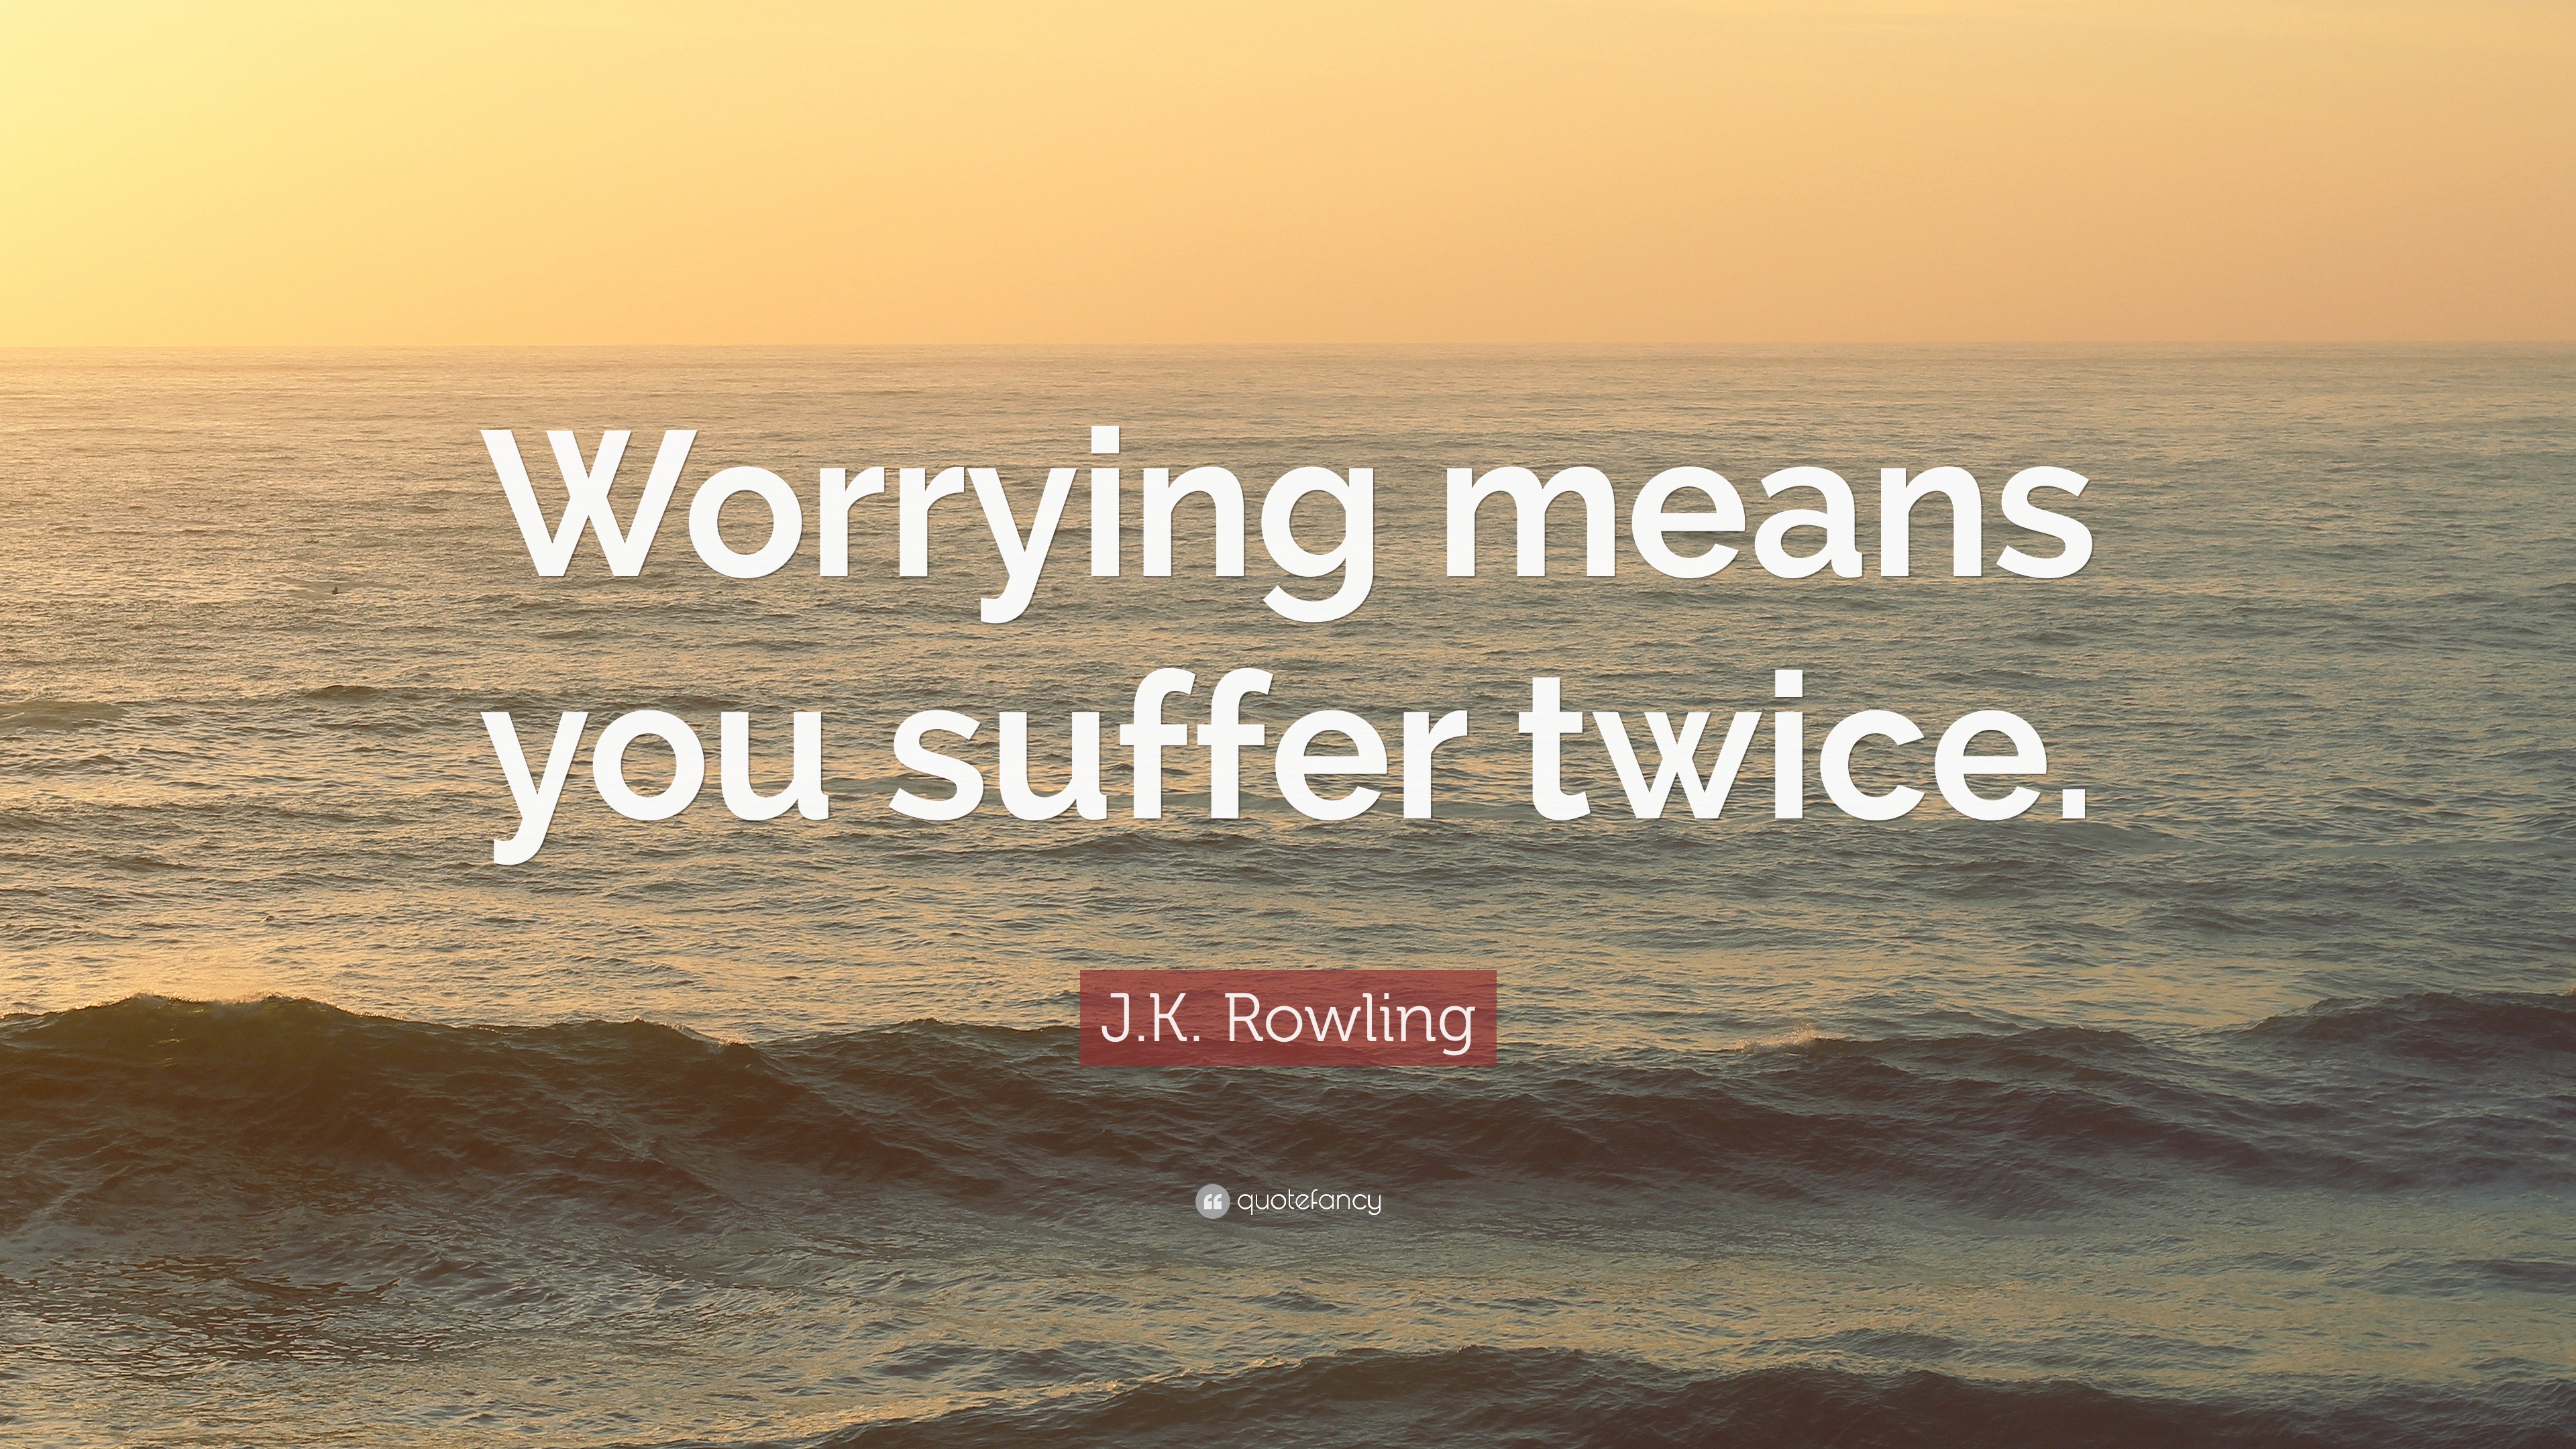 J.K. Rowling Quote: “Worrying means you suffer twice.”